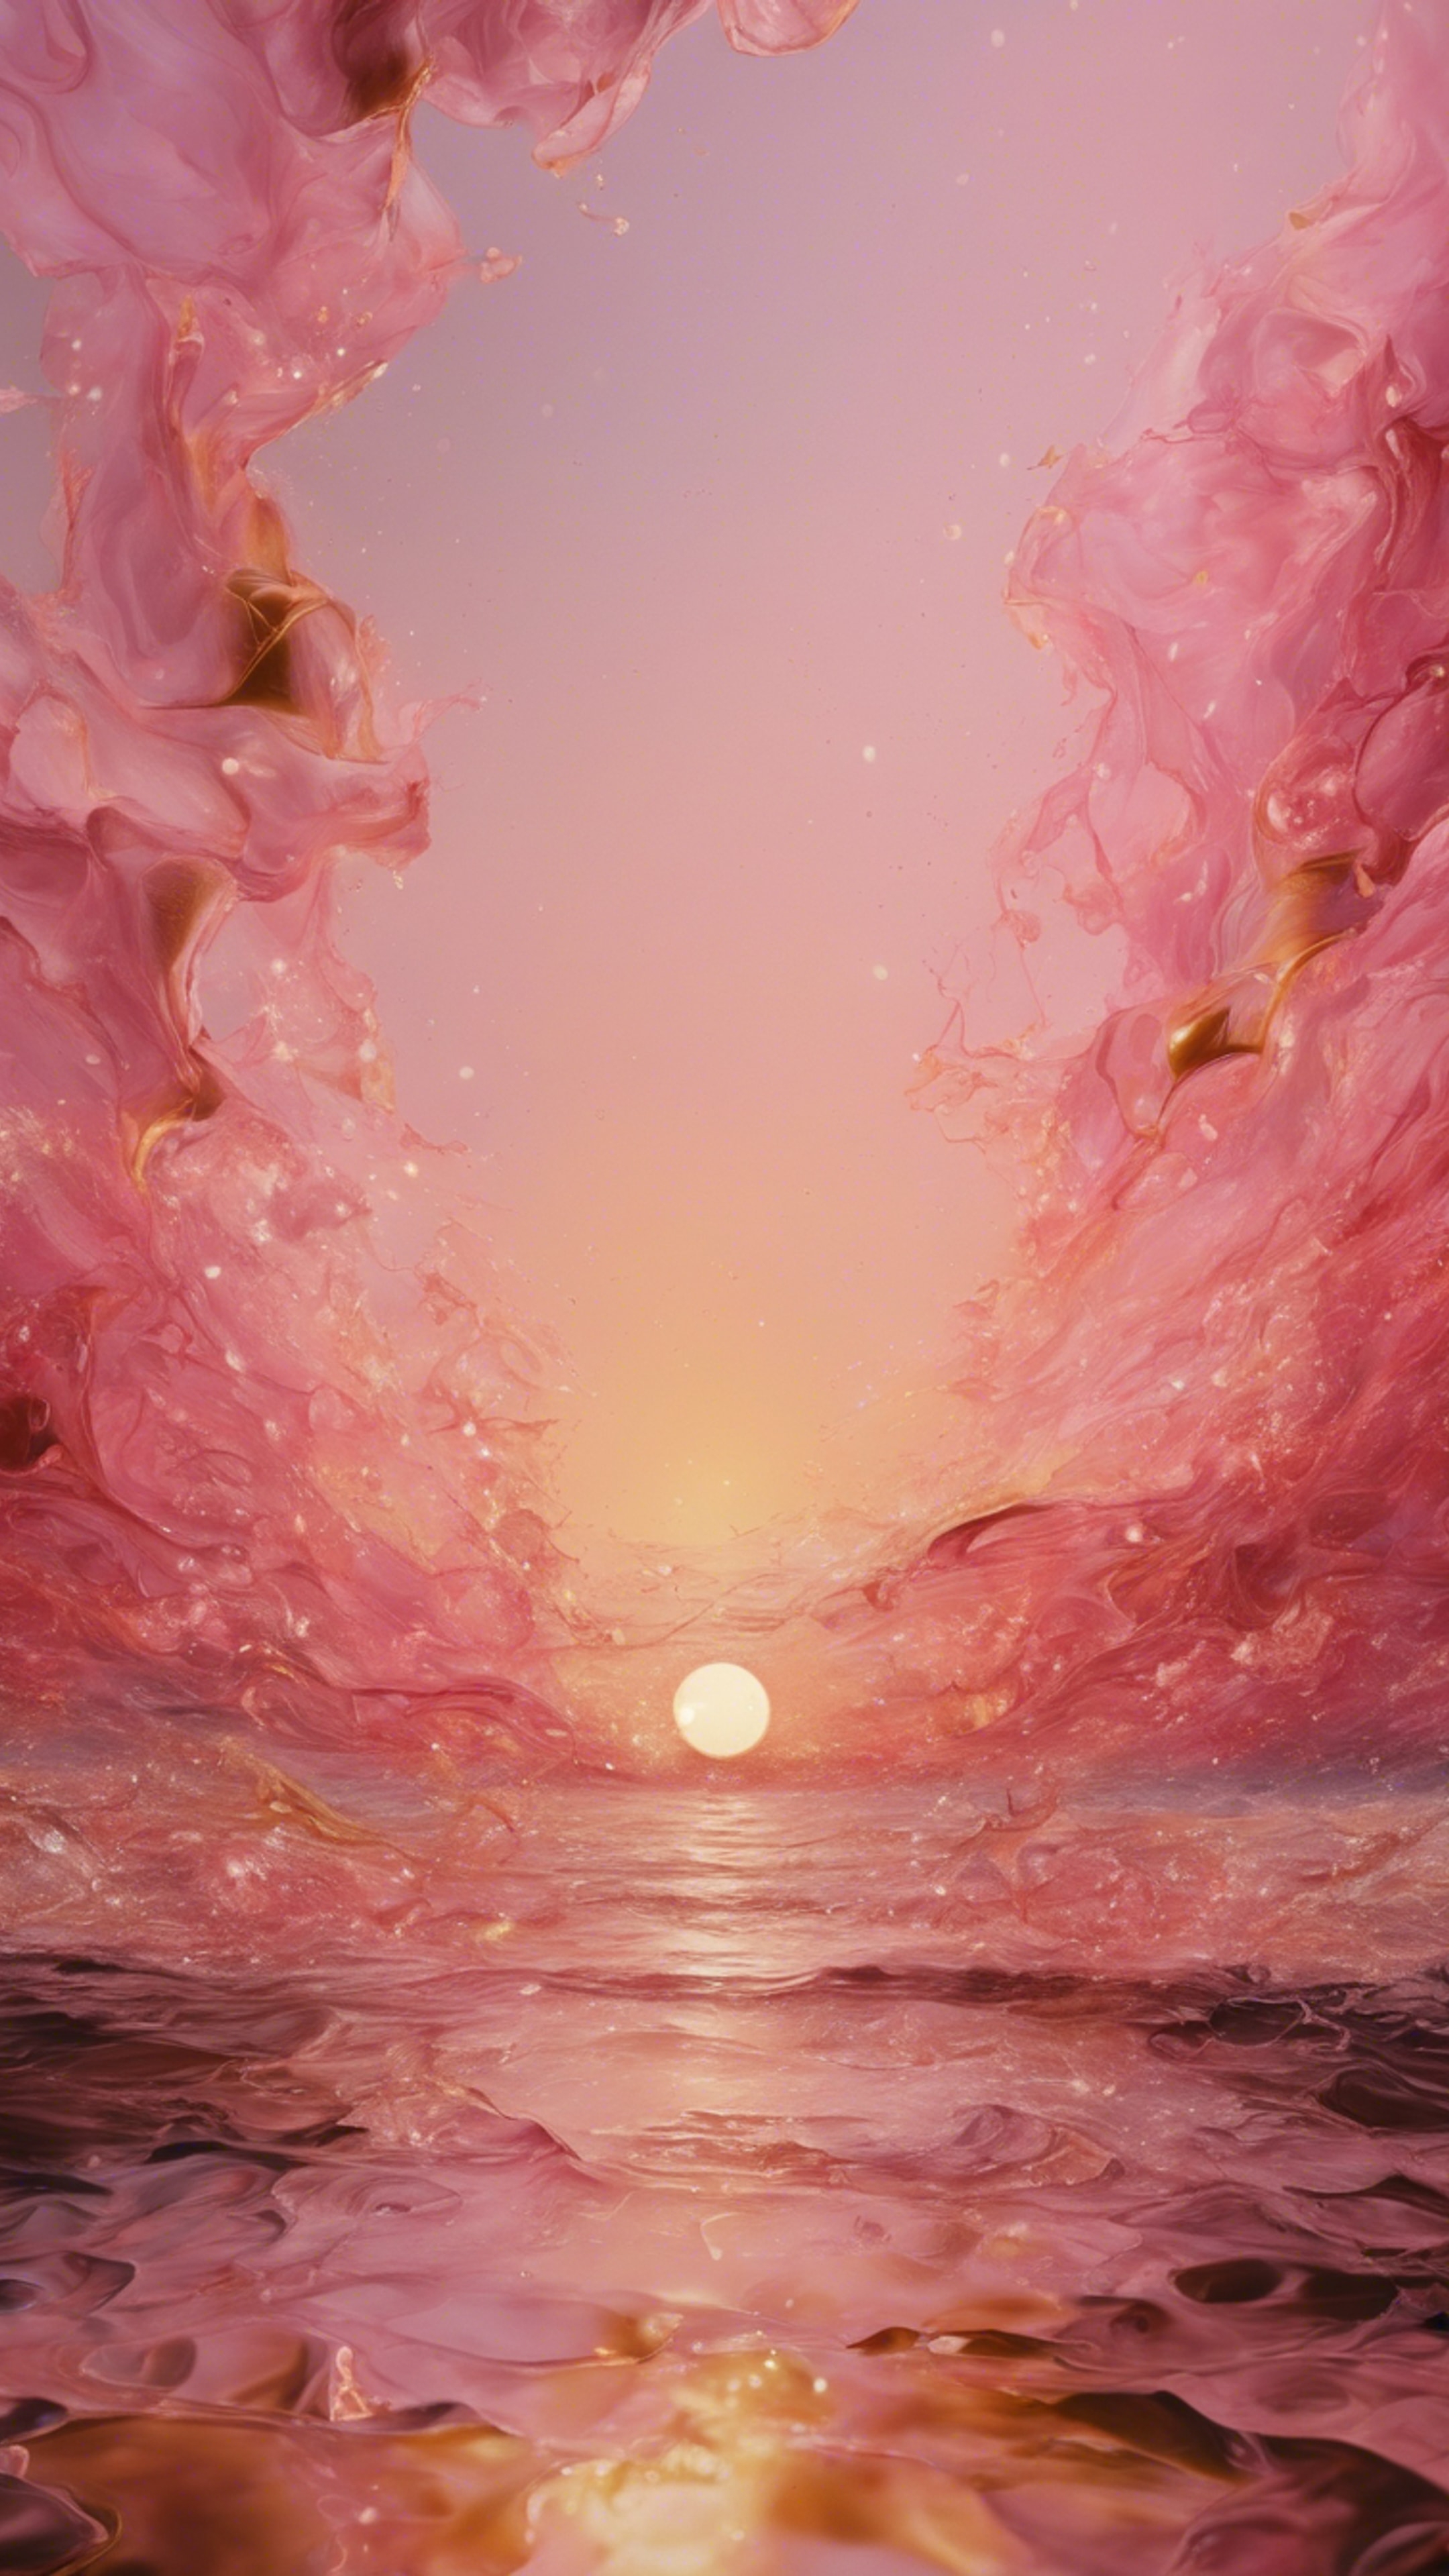 An abstract painting depicting a fusion of rose pink and gold, creating a sunset. Tapeta na zeď[c07a48b6857e4311b231]